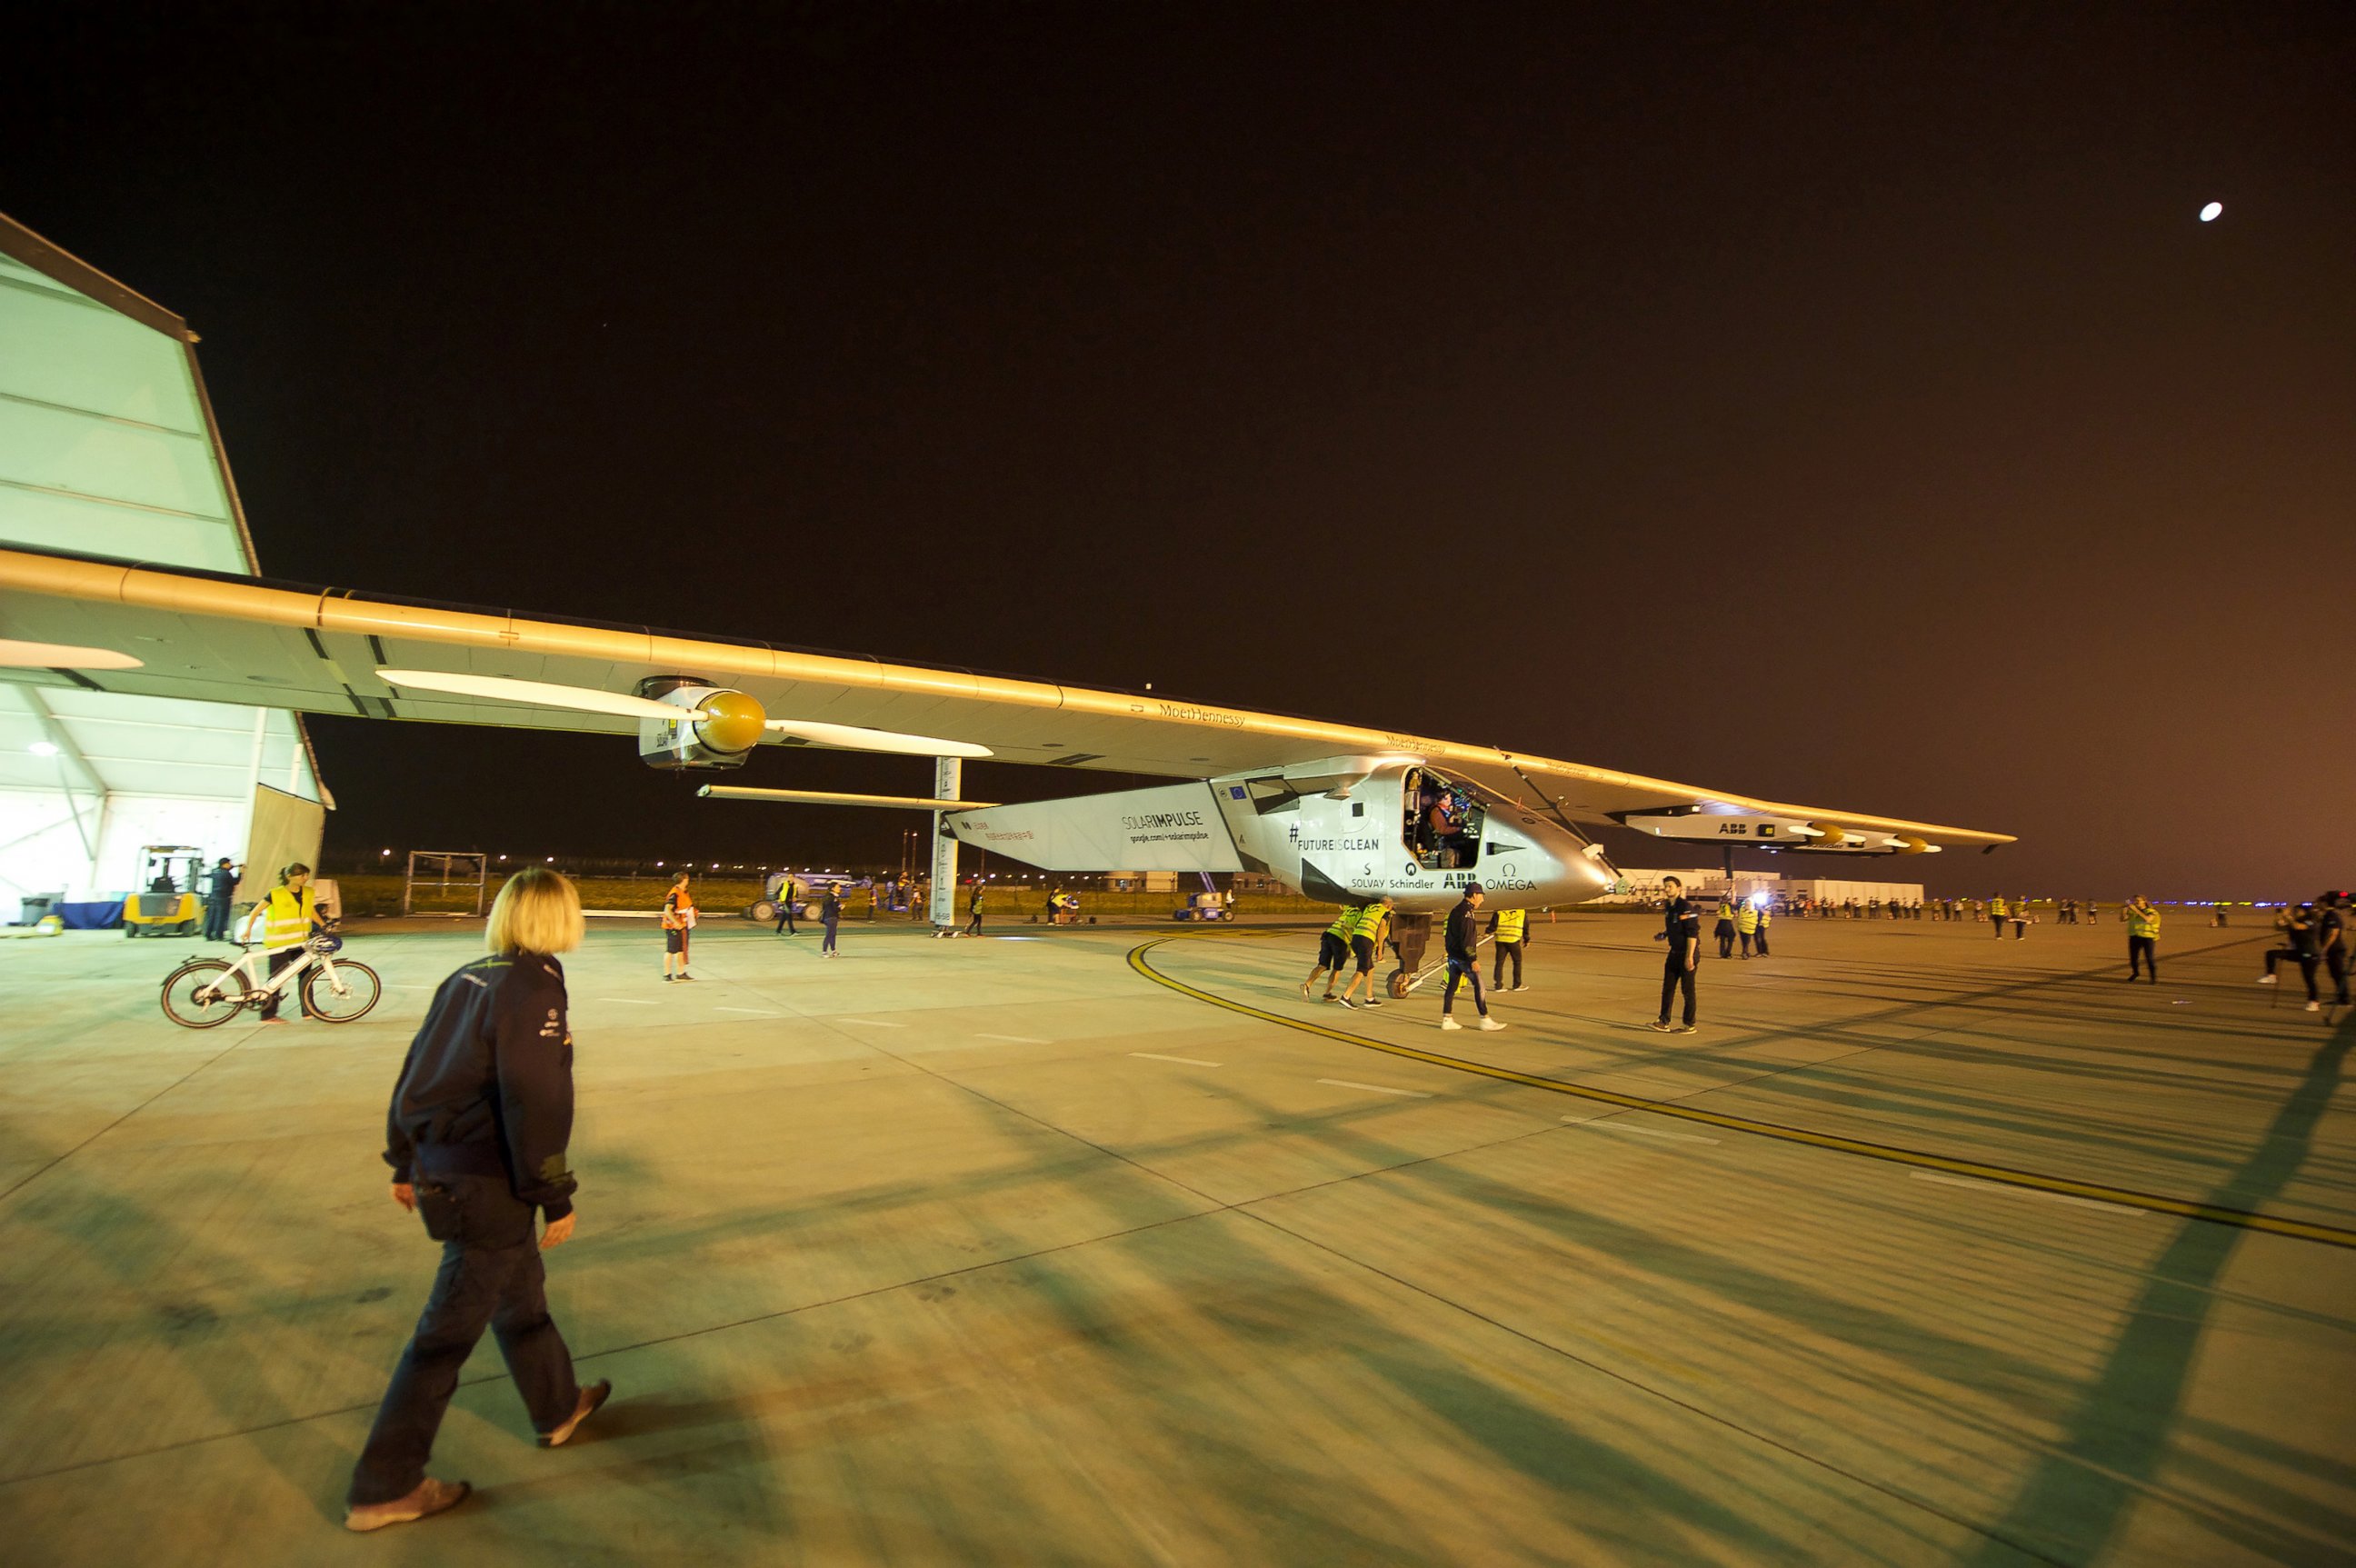 PHOTO: The Swiss-made solar-powered plane Solar Impulse 2 prepares to take off from Nanjing Lukou International Airport on May 31, 2015 in Nanjing, China.